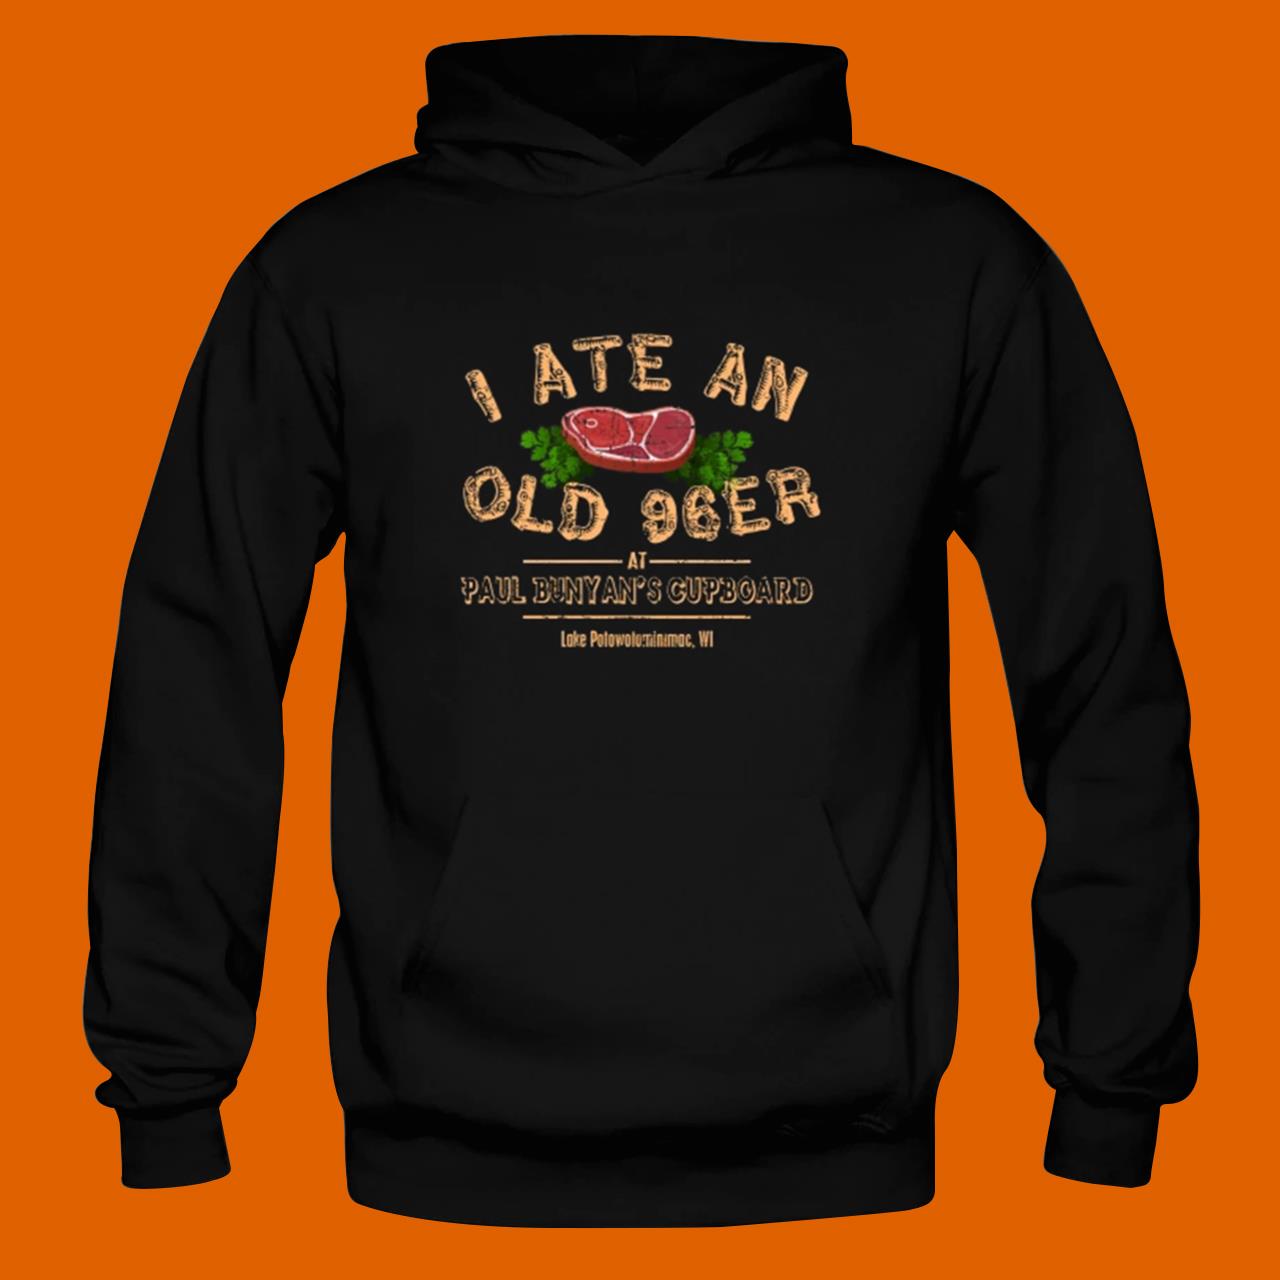 I Ate An Old 96er From The Great Outdoors T-shirt